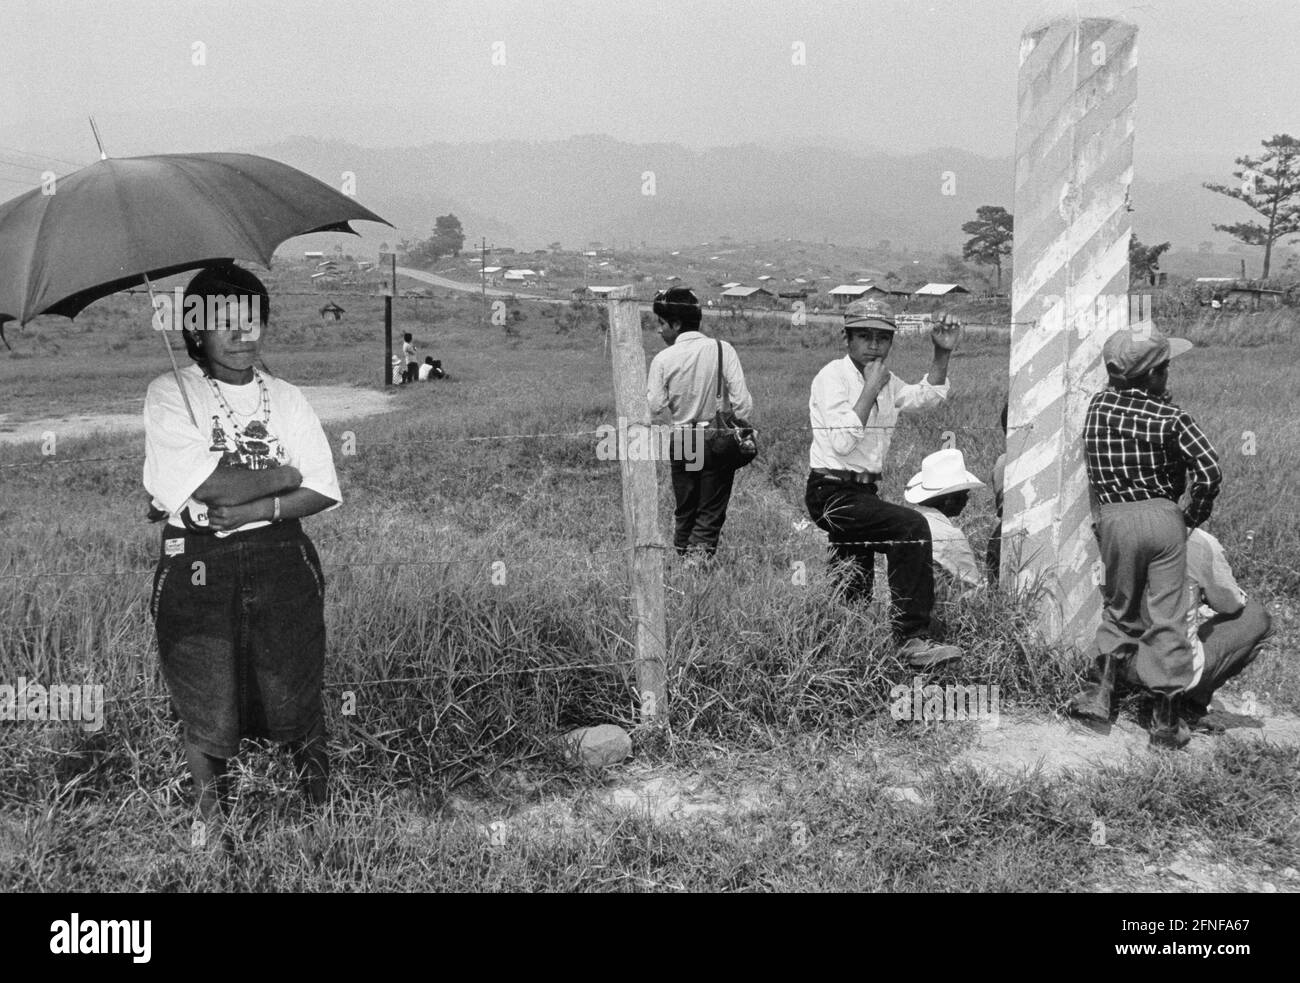 During a land occupation in the highlands of Chiapas. Campesino families (desplazados) evicted from the land occupy a finca. [automated translation] Stock Photo